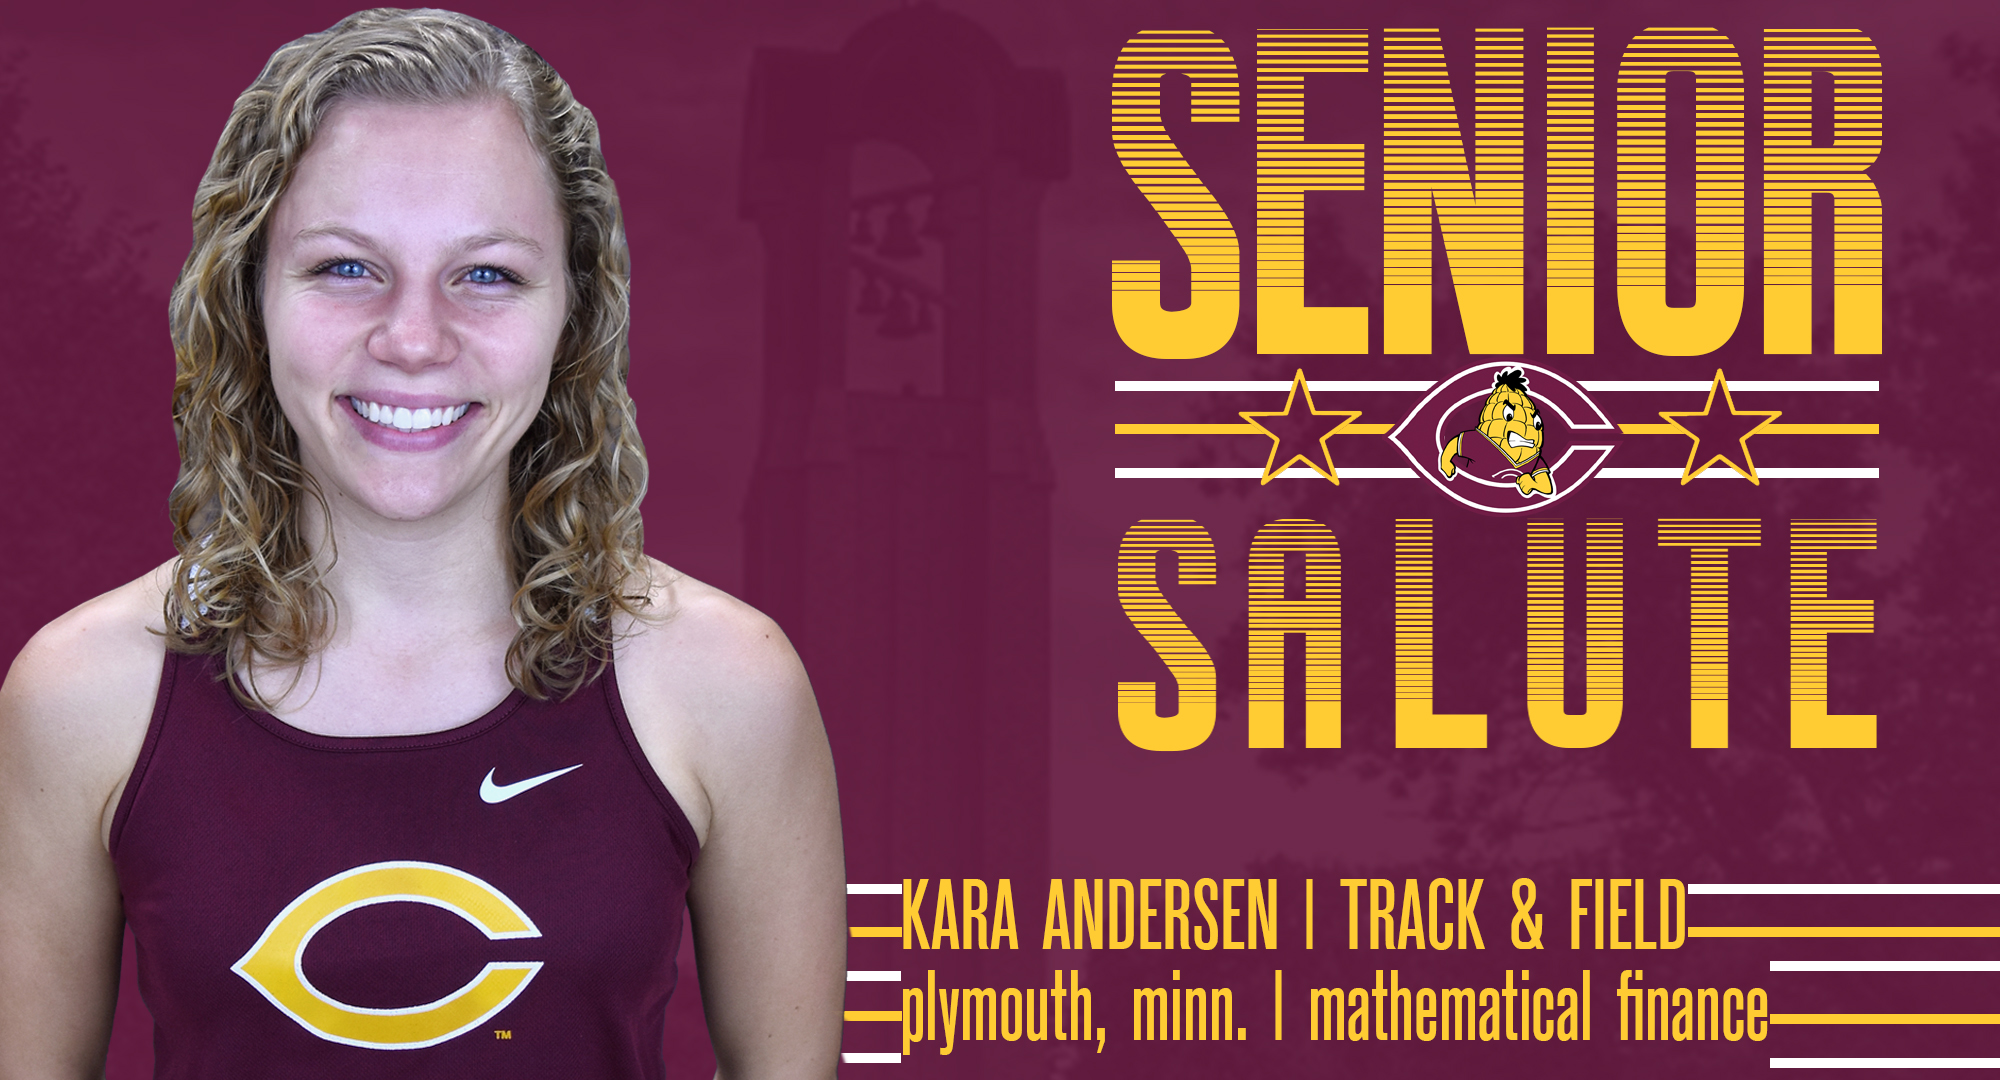 Senior Kara Andersen has placed in the Top 6 in the 5000 meters in three straight conference meets.